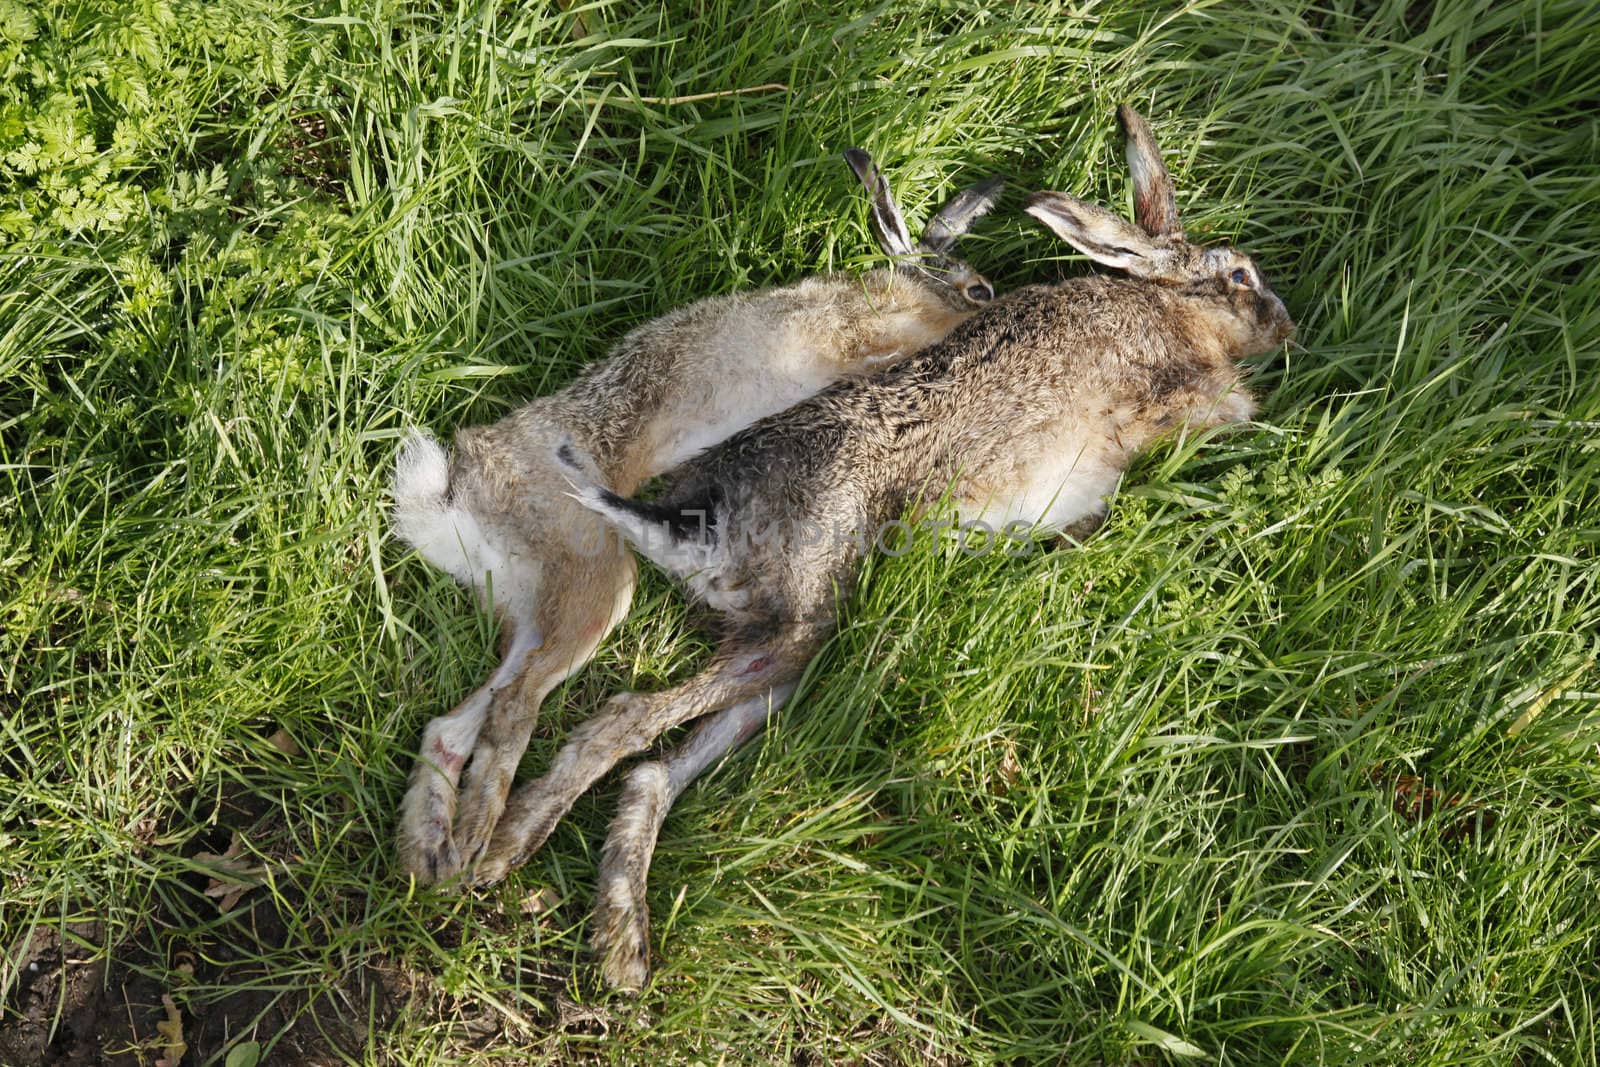 Two shot hares in the grass after the hunt